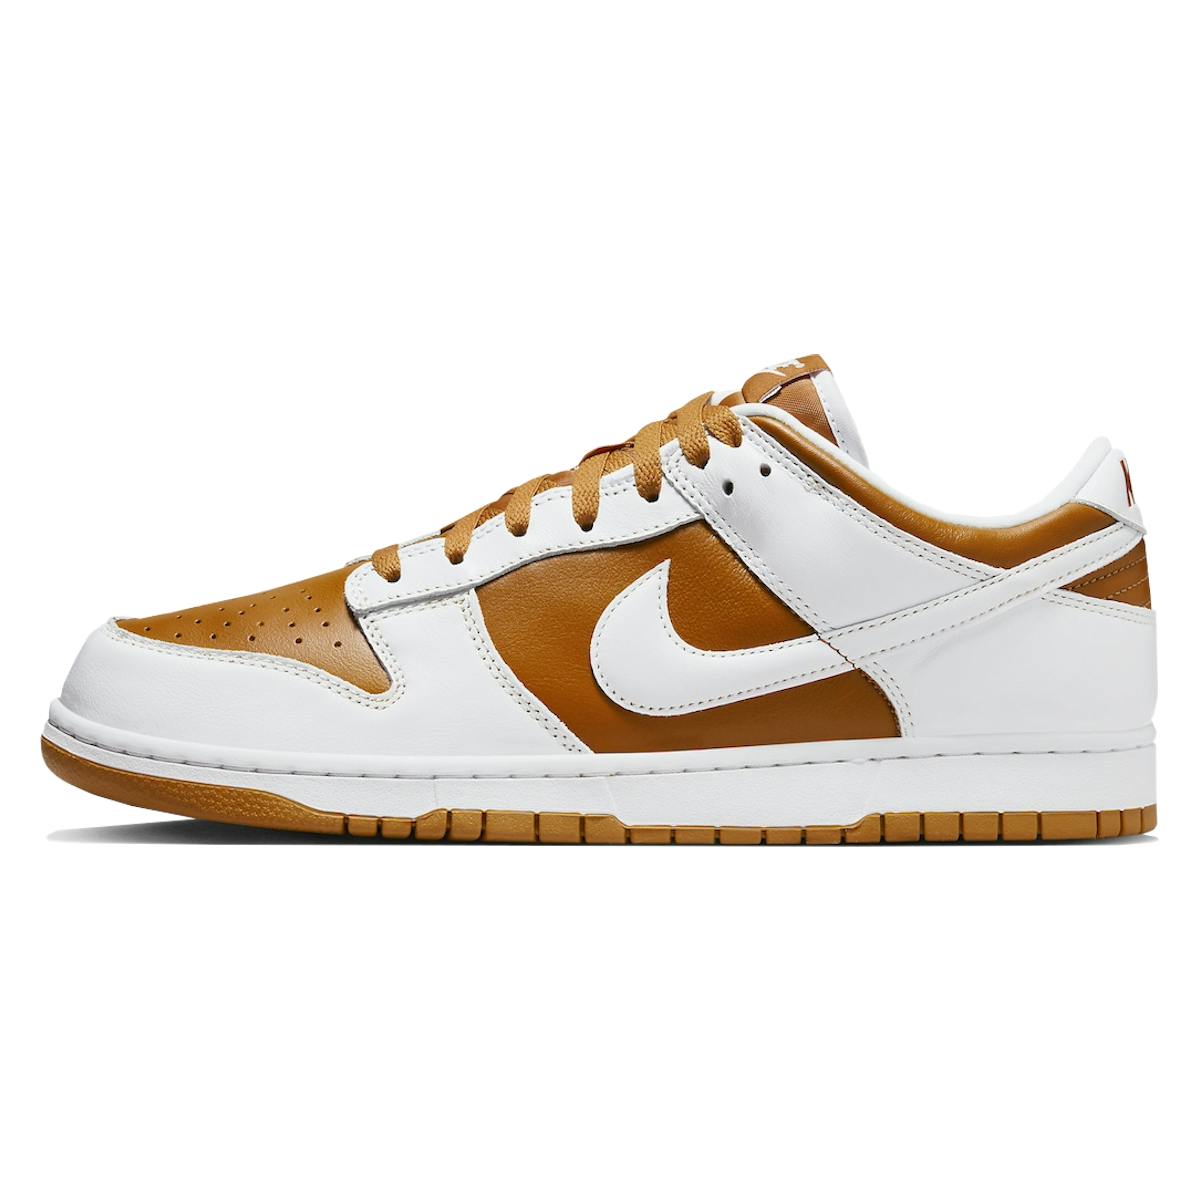 Nike Dunk Low "Reverse Curry"